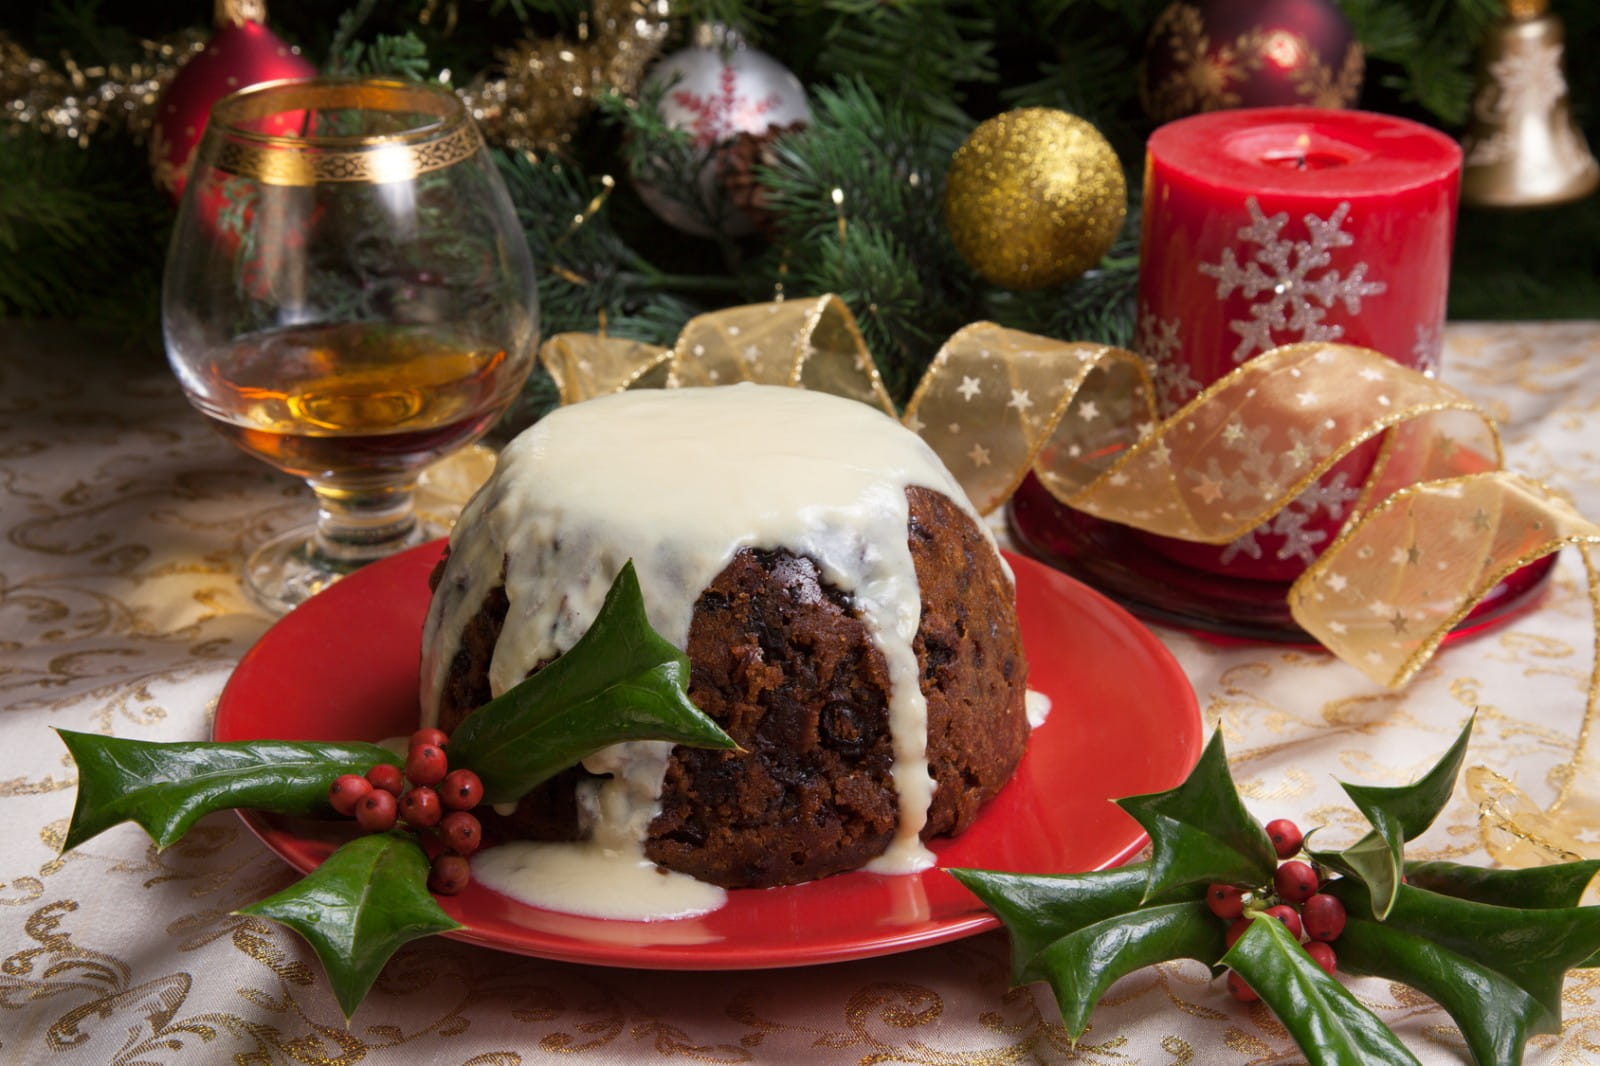 What's the best wine to drink with Christmas pudding?